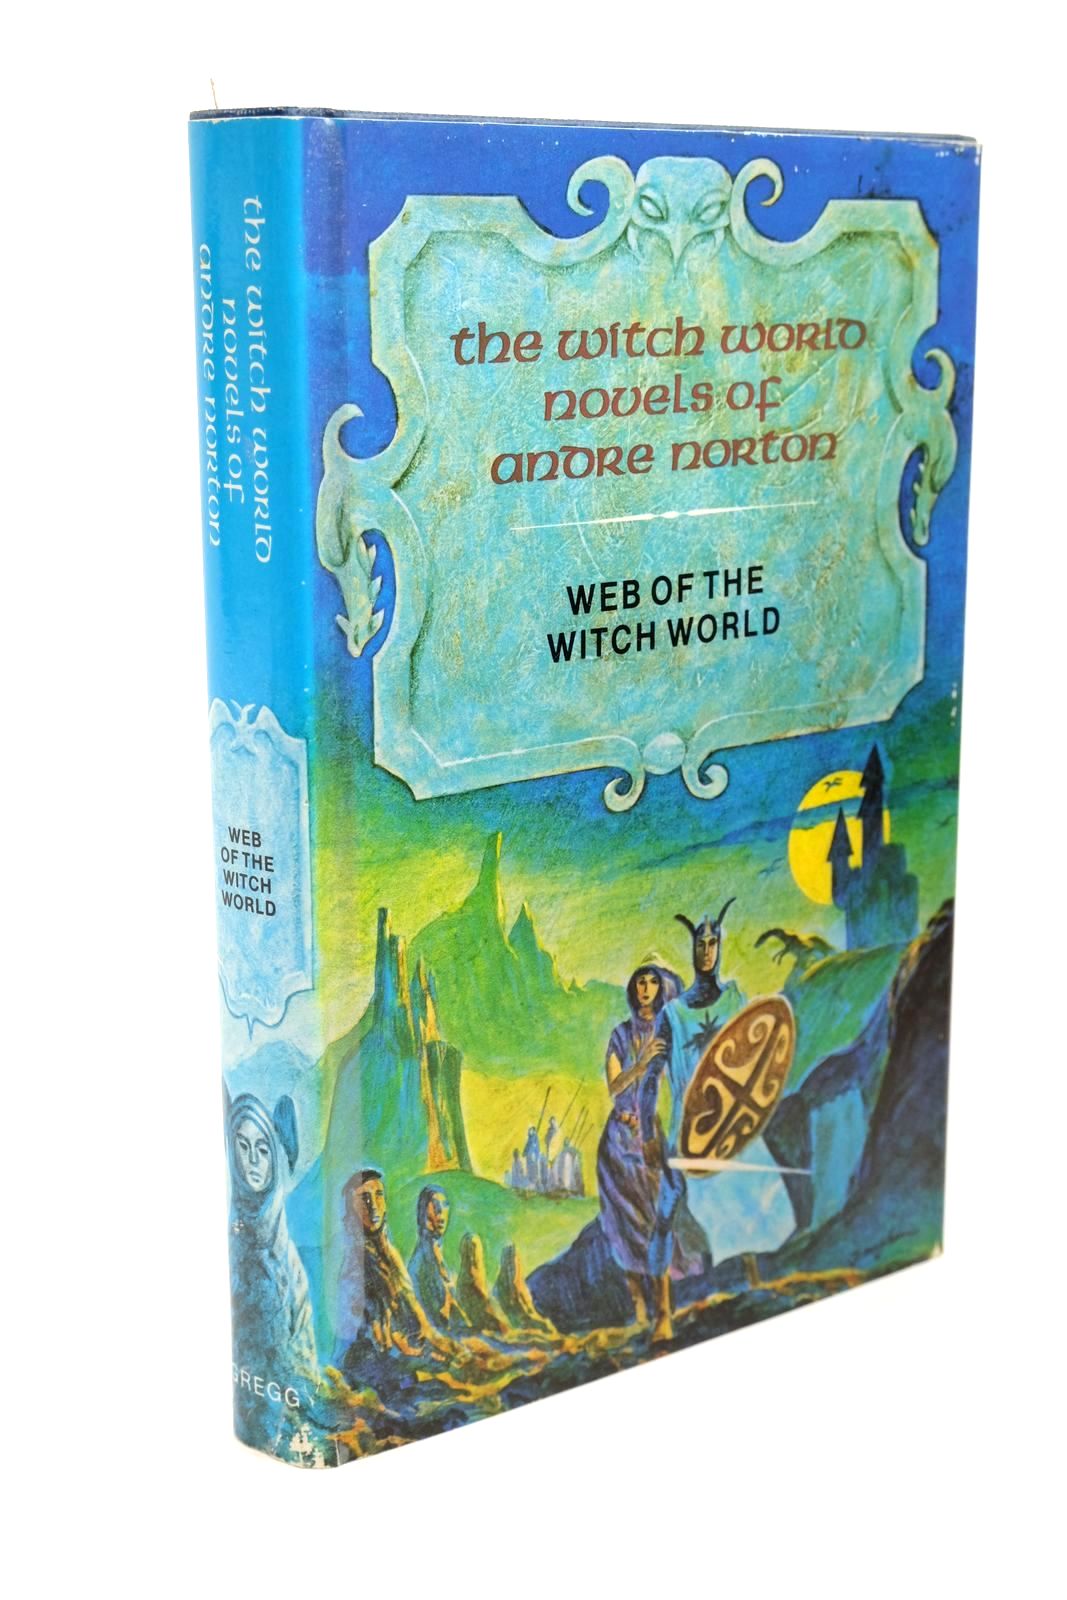 Photo of WEB OF THE WITCH WORLD written by Norton, Andre illustrated by Gaughan, Jack Phalen, Alice Johnson, Barbi published by Gregg Press (STOCK CODE: 1323177)  for sale by Stella & Rose's Books